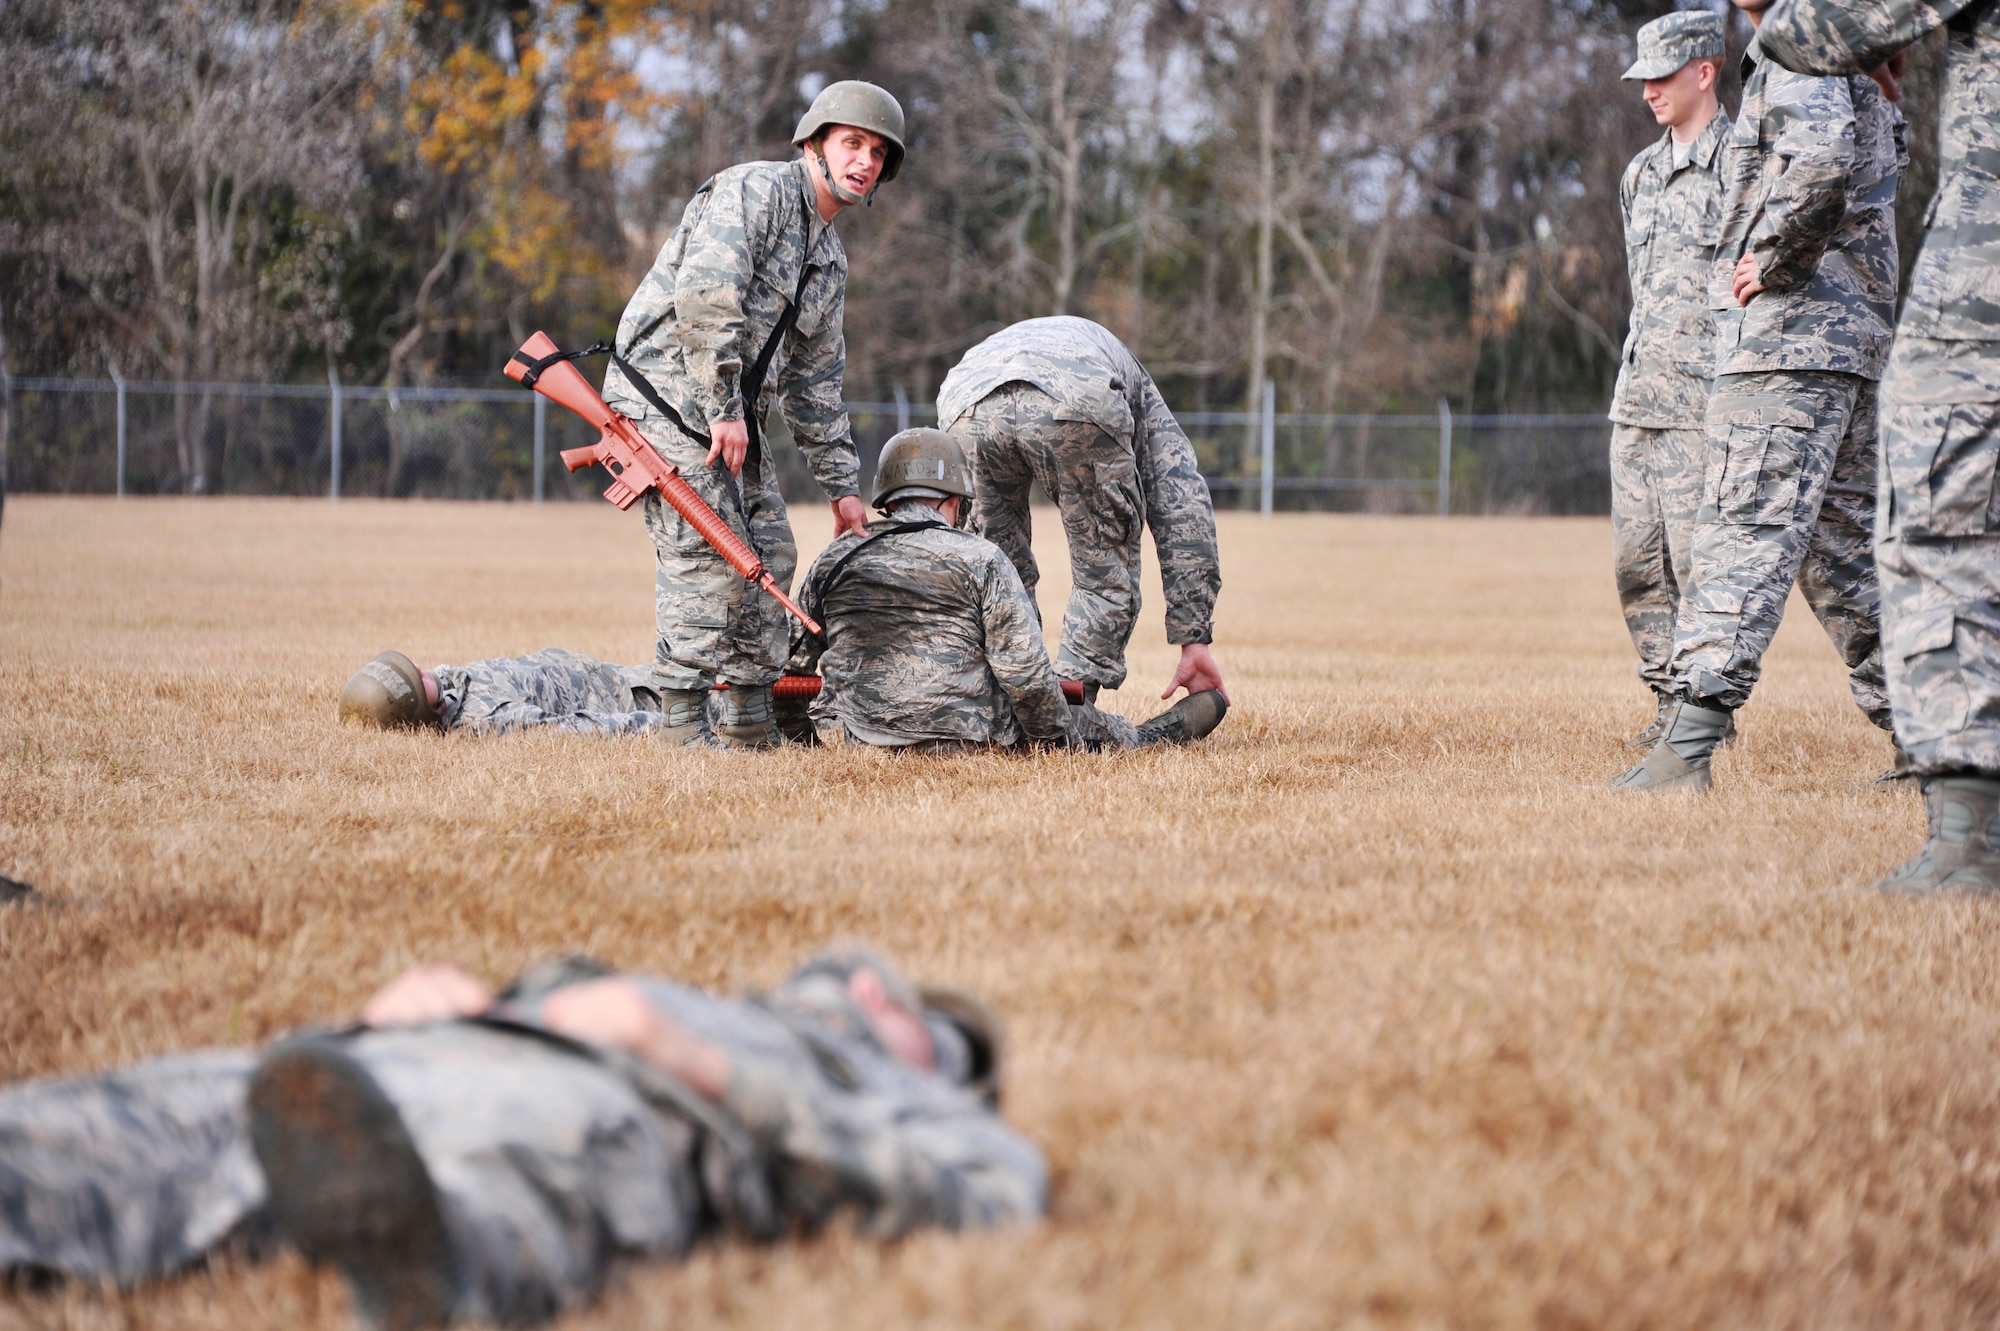 Class 14-03 officer trainees work together to carry their fellow classmates to safety during the basic expeditionary leadership problem solving course Dec. 4, 2013, at Maxwell Air Force Base, Ala. The BELPS course is a part of the first phase of Basic Officer Training School, which is a nine-week long program involving four training phases. During this course the officer candidate students are individually tasked to take lead in solving a problem they would possibly run into in the operational Air Force.  (U.S. Air Force photo by Staff Sgt. Natasha Stannard)